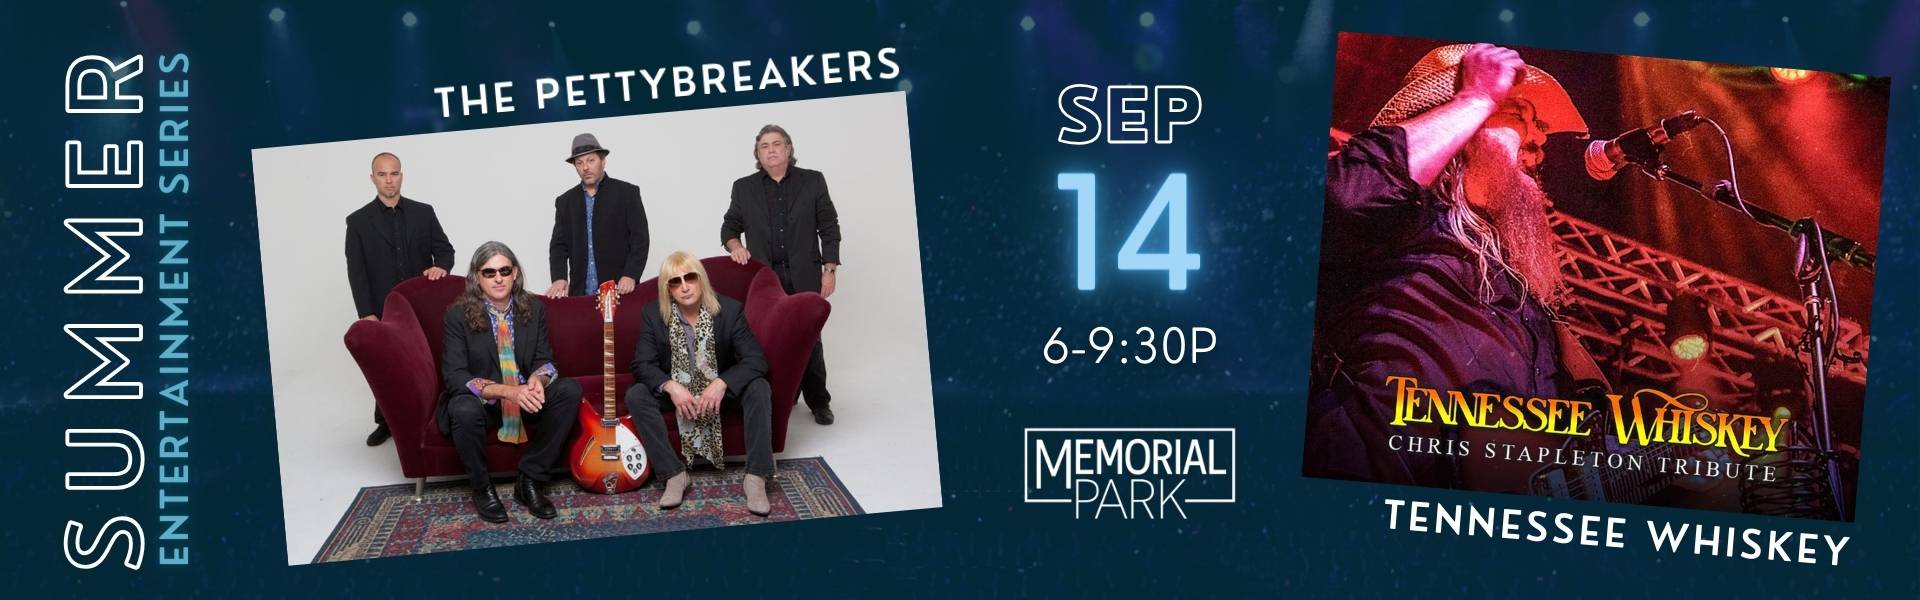 Memorial Park performance featuring The Pettybreakers and Tennessee Whiskey